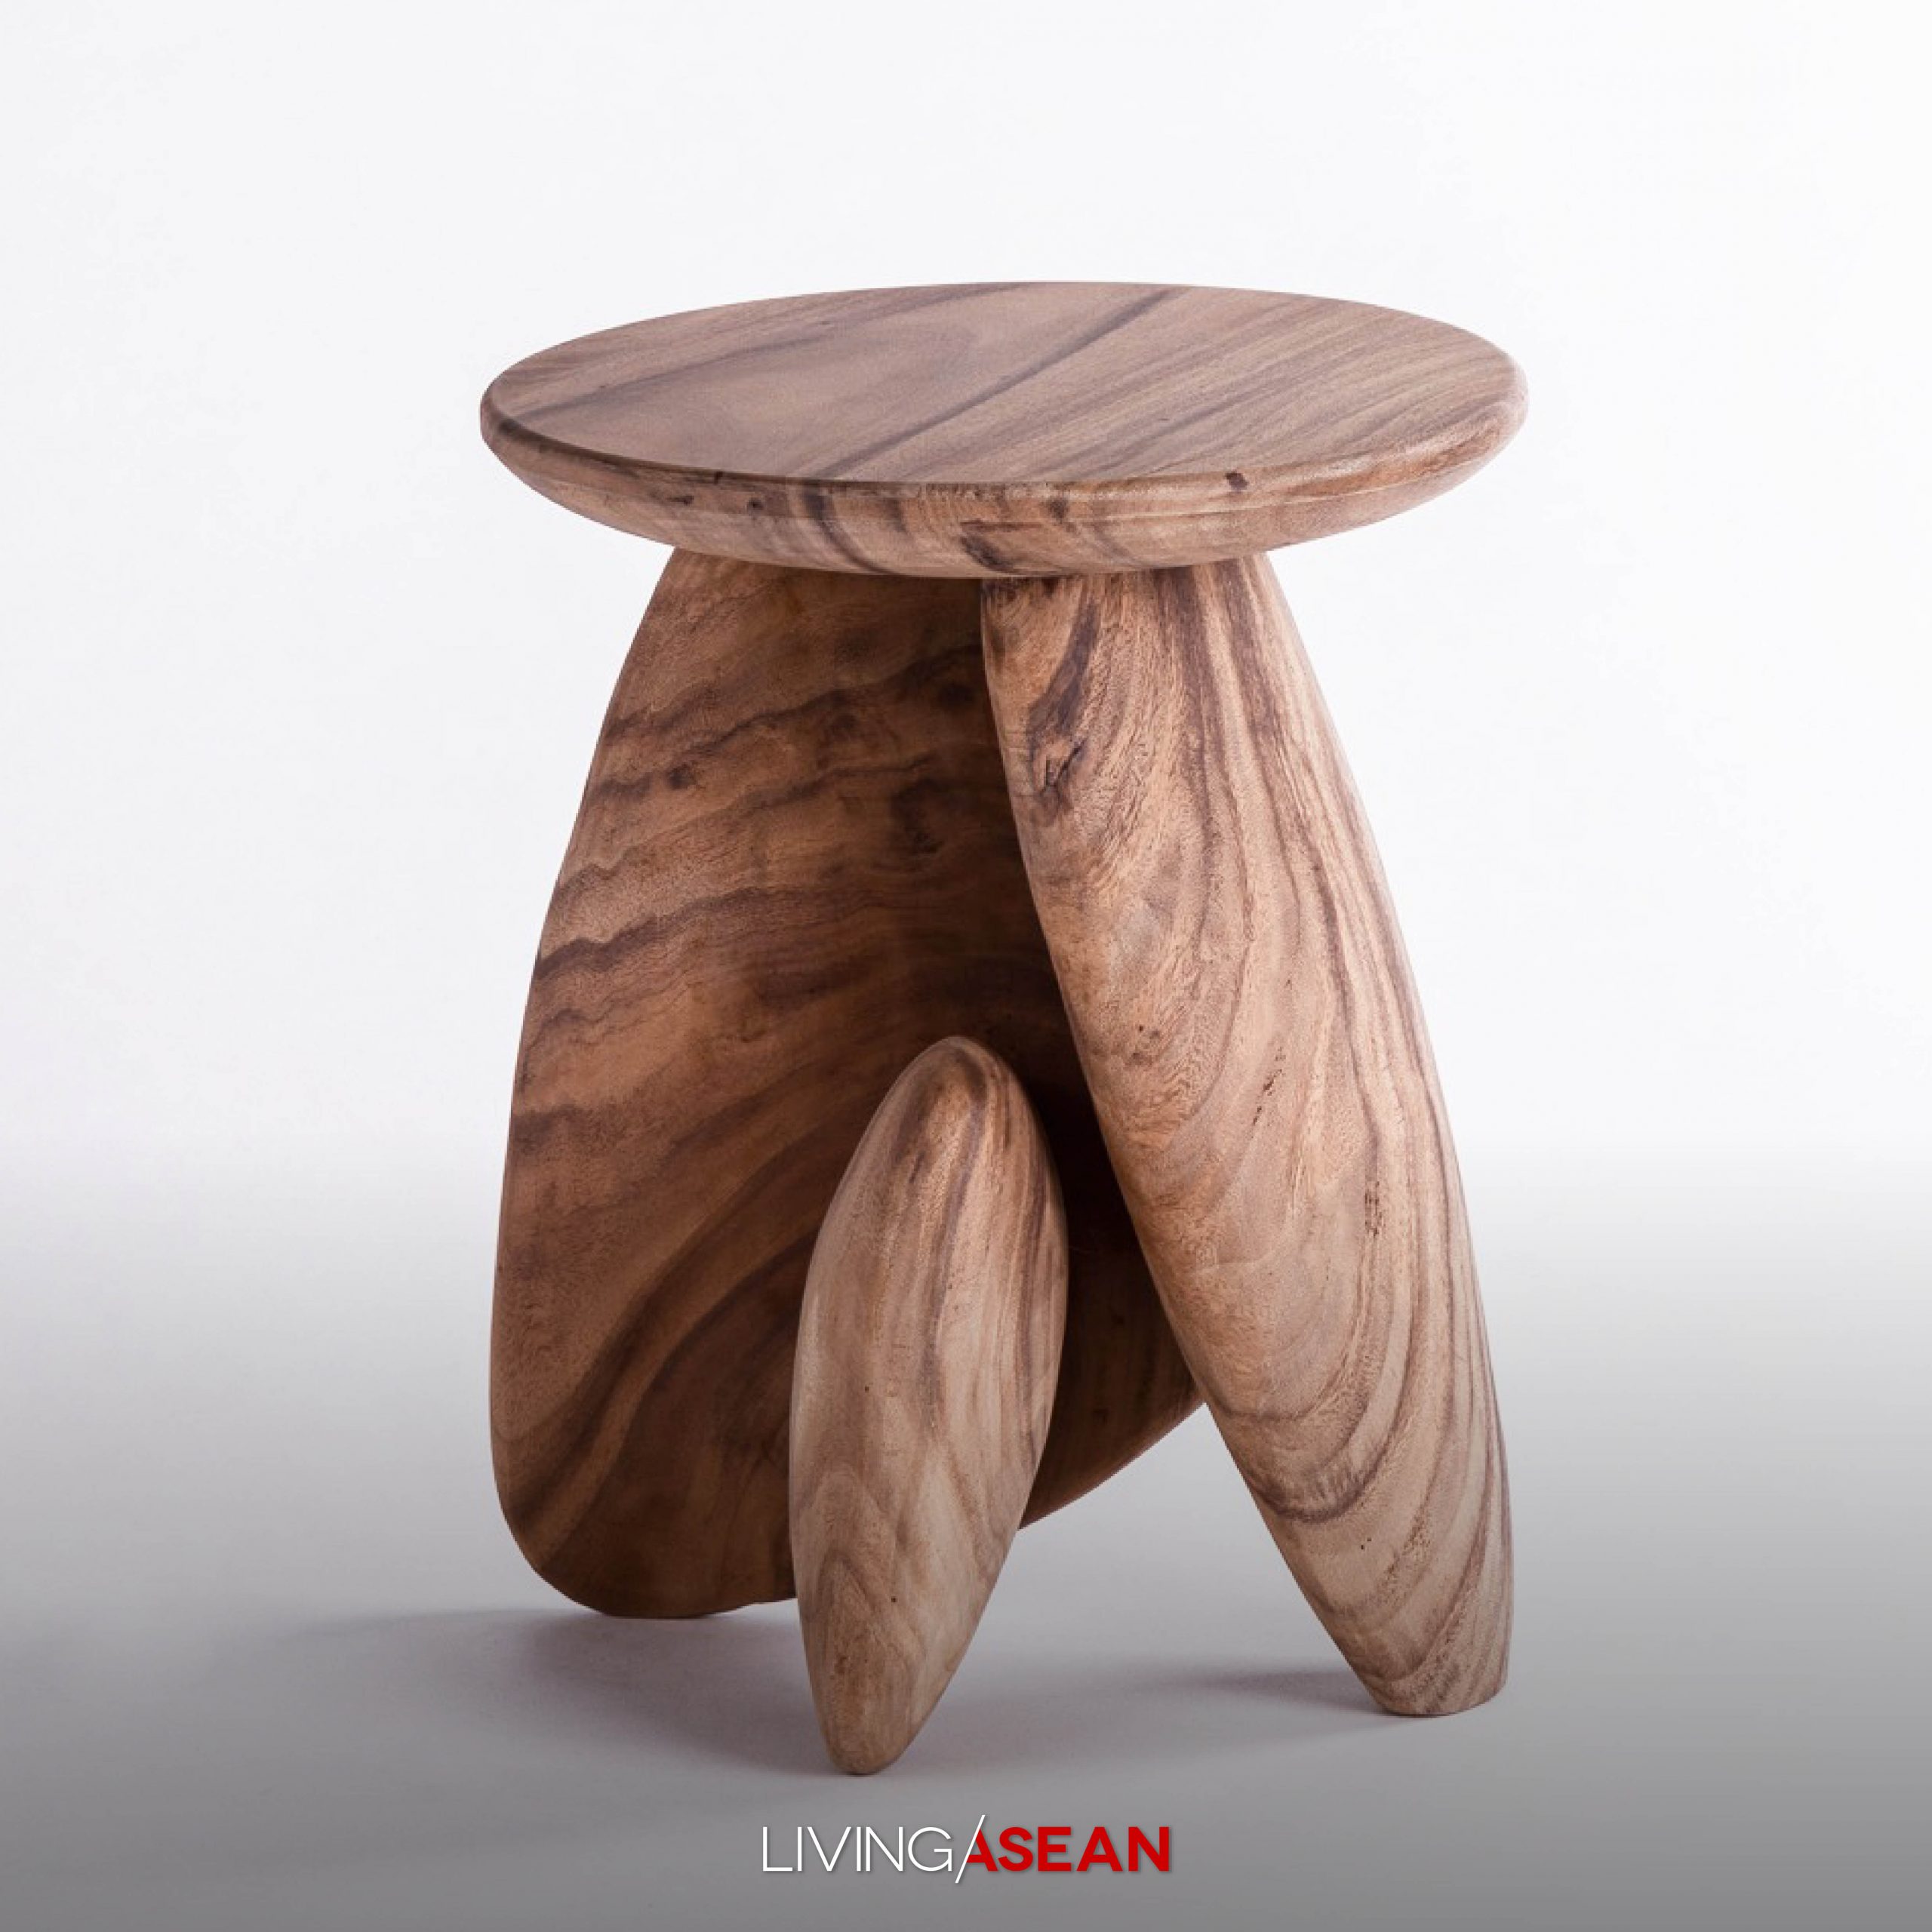 Moonler Wood Furniture: Adding a New Dimension to Chiang Mai Crafts